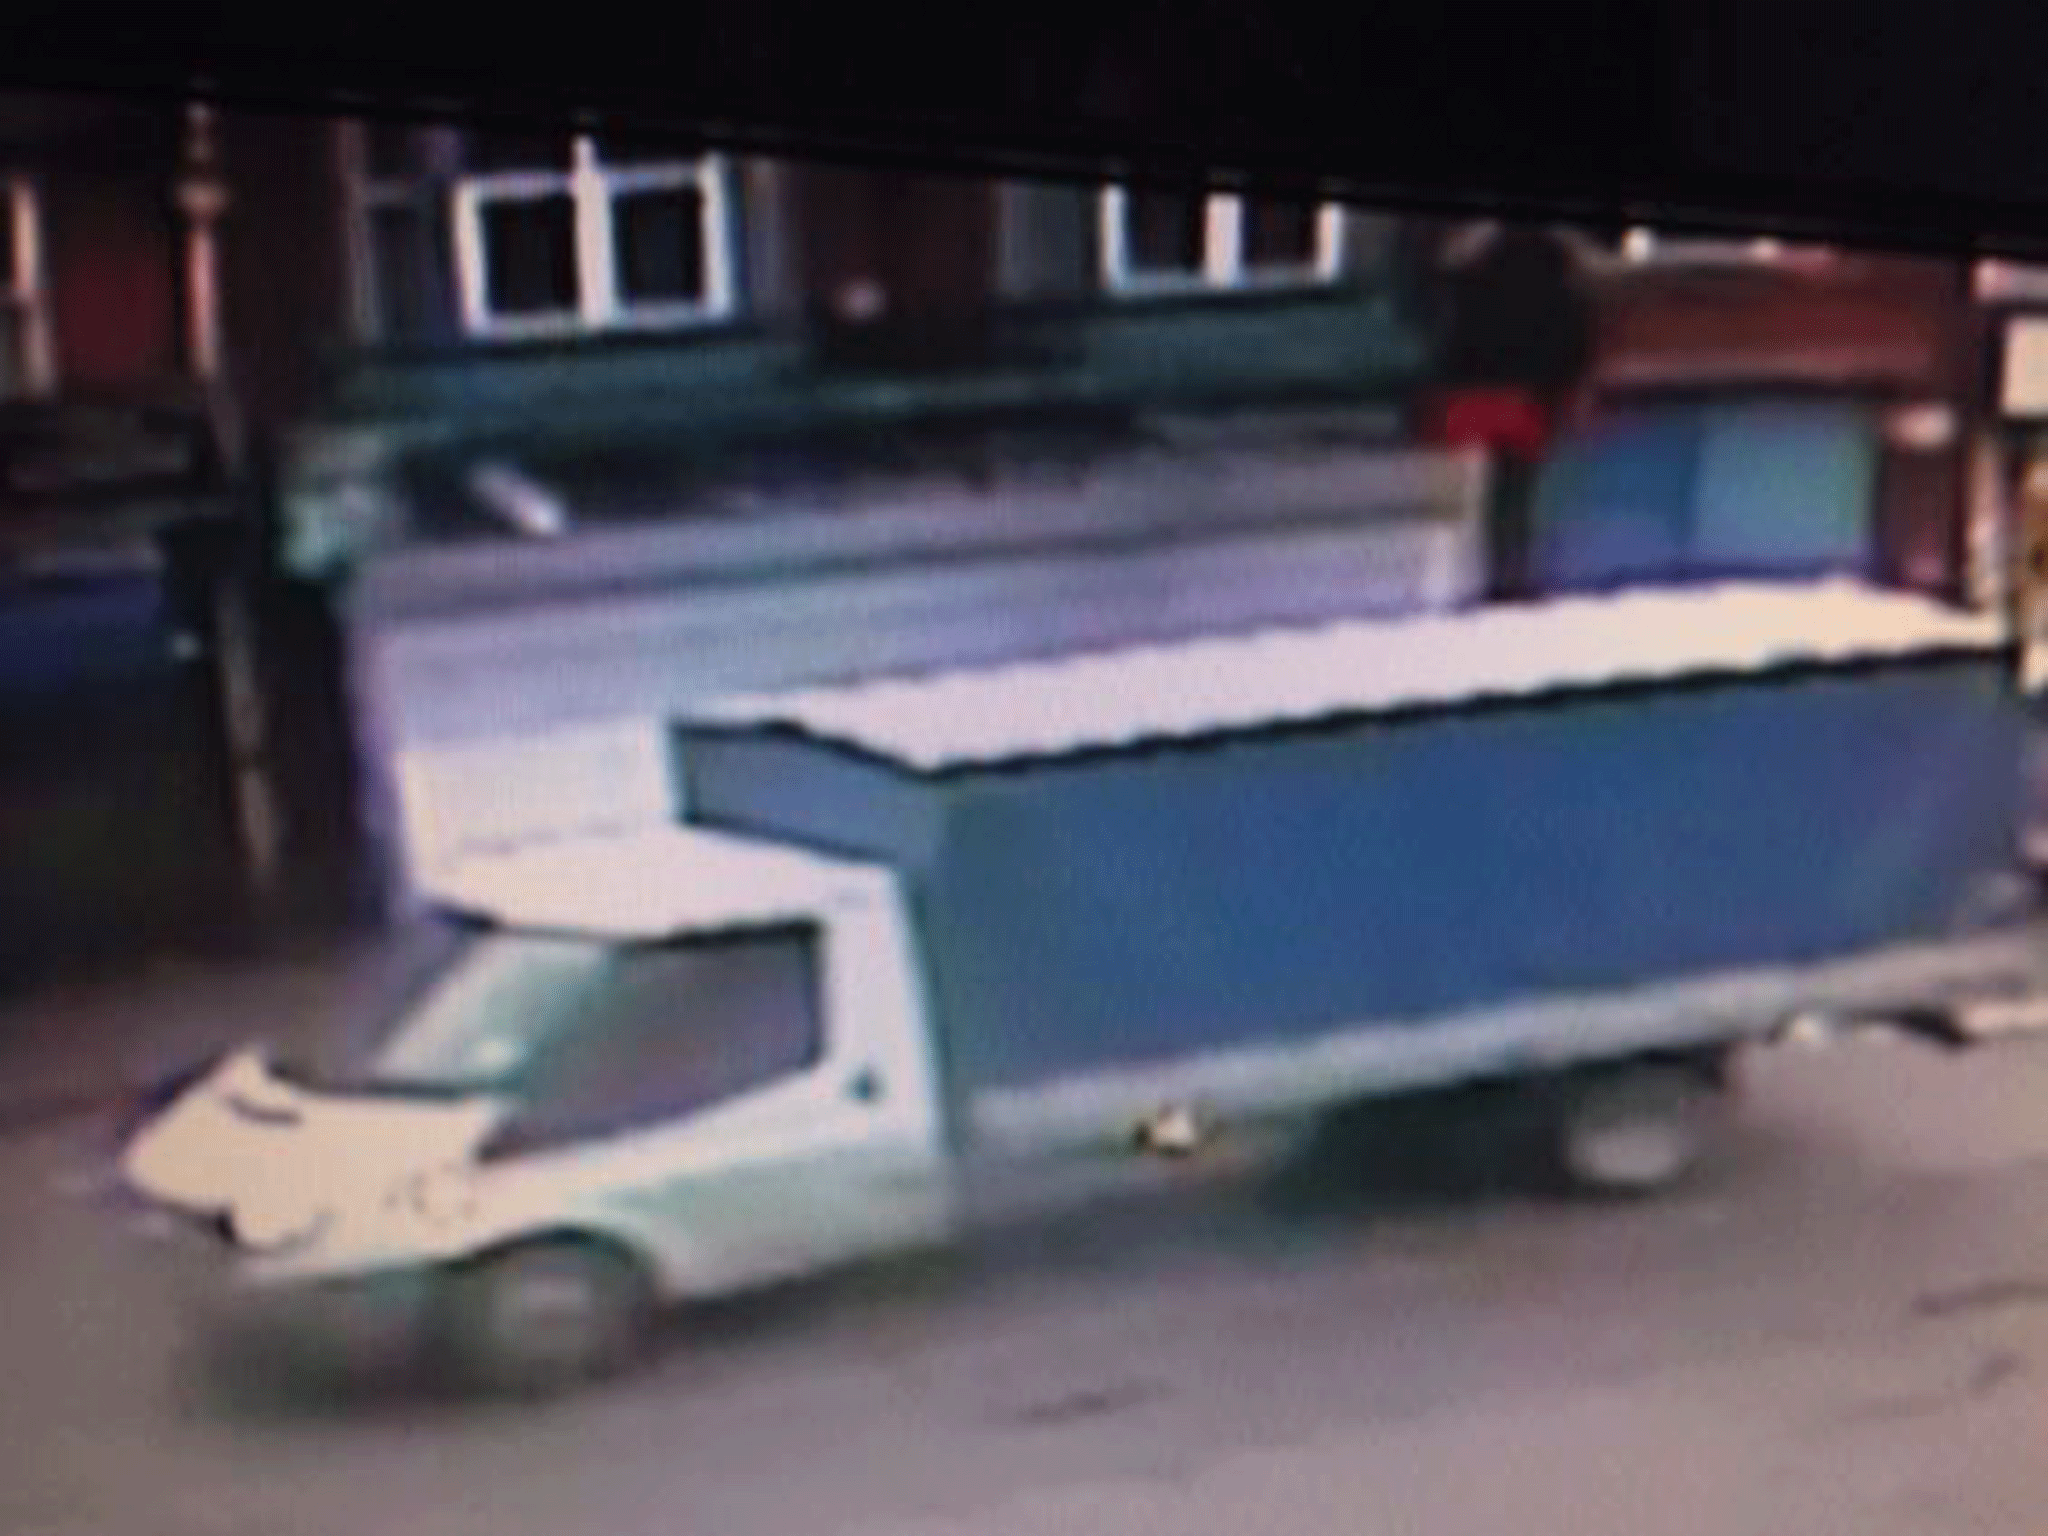 The man was driving a distinctive flat-bed lorry, said police